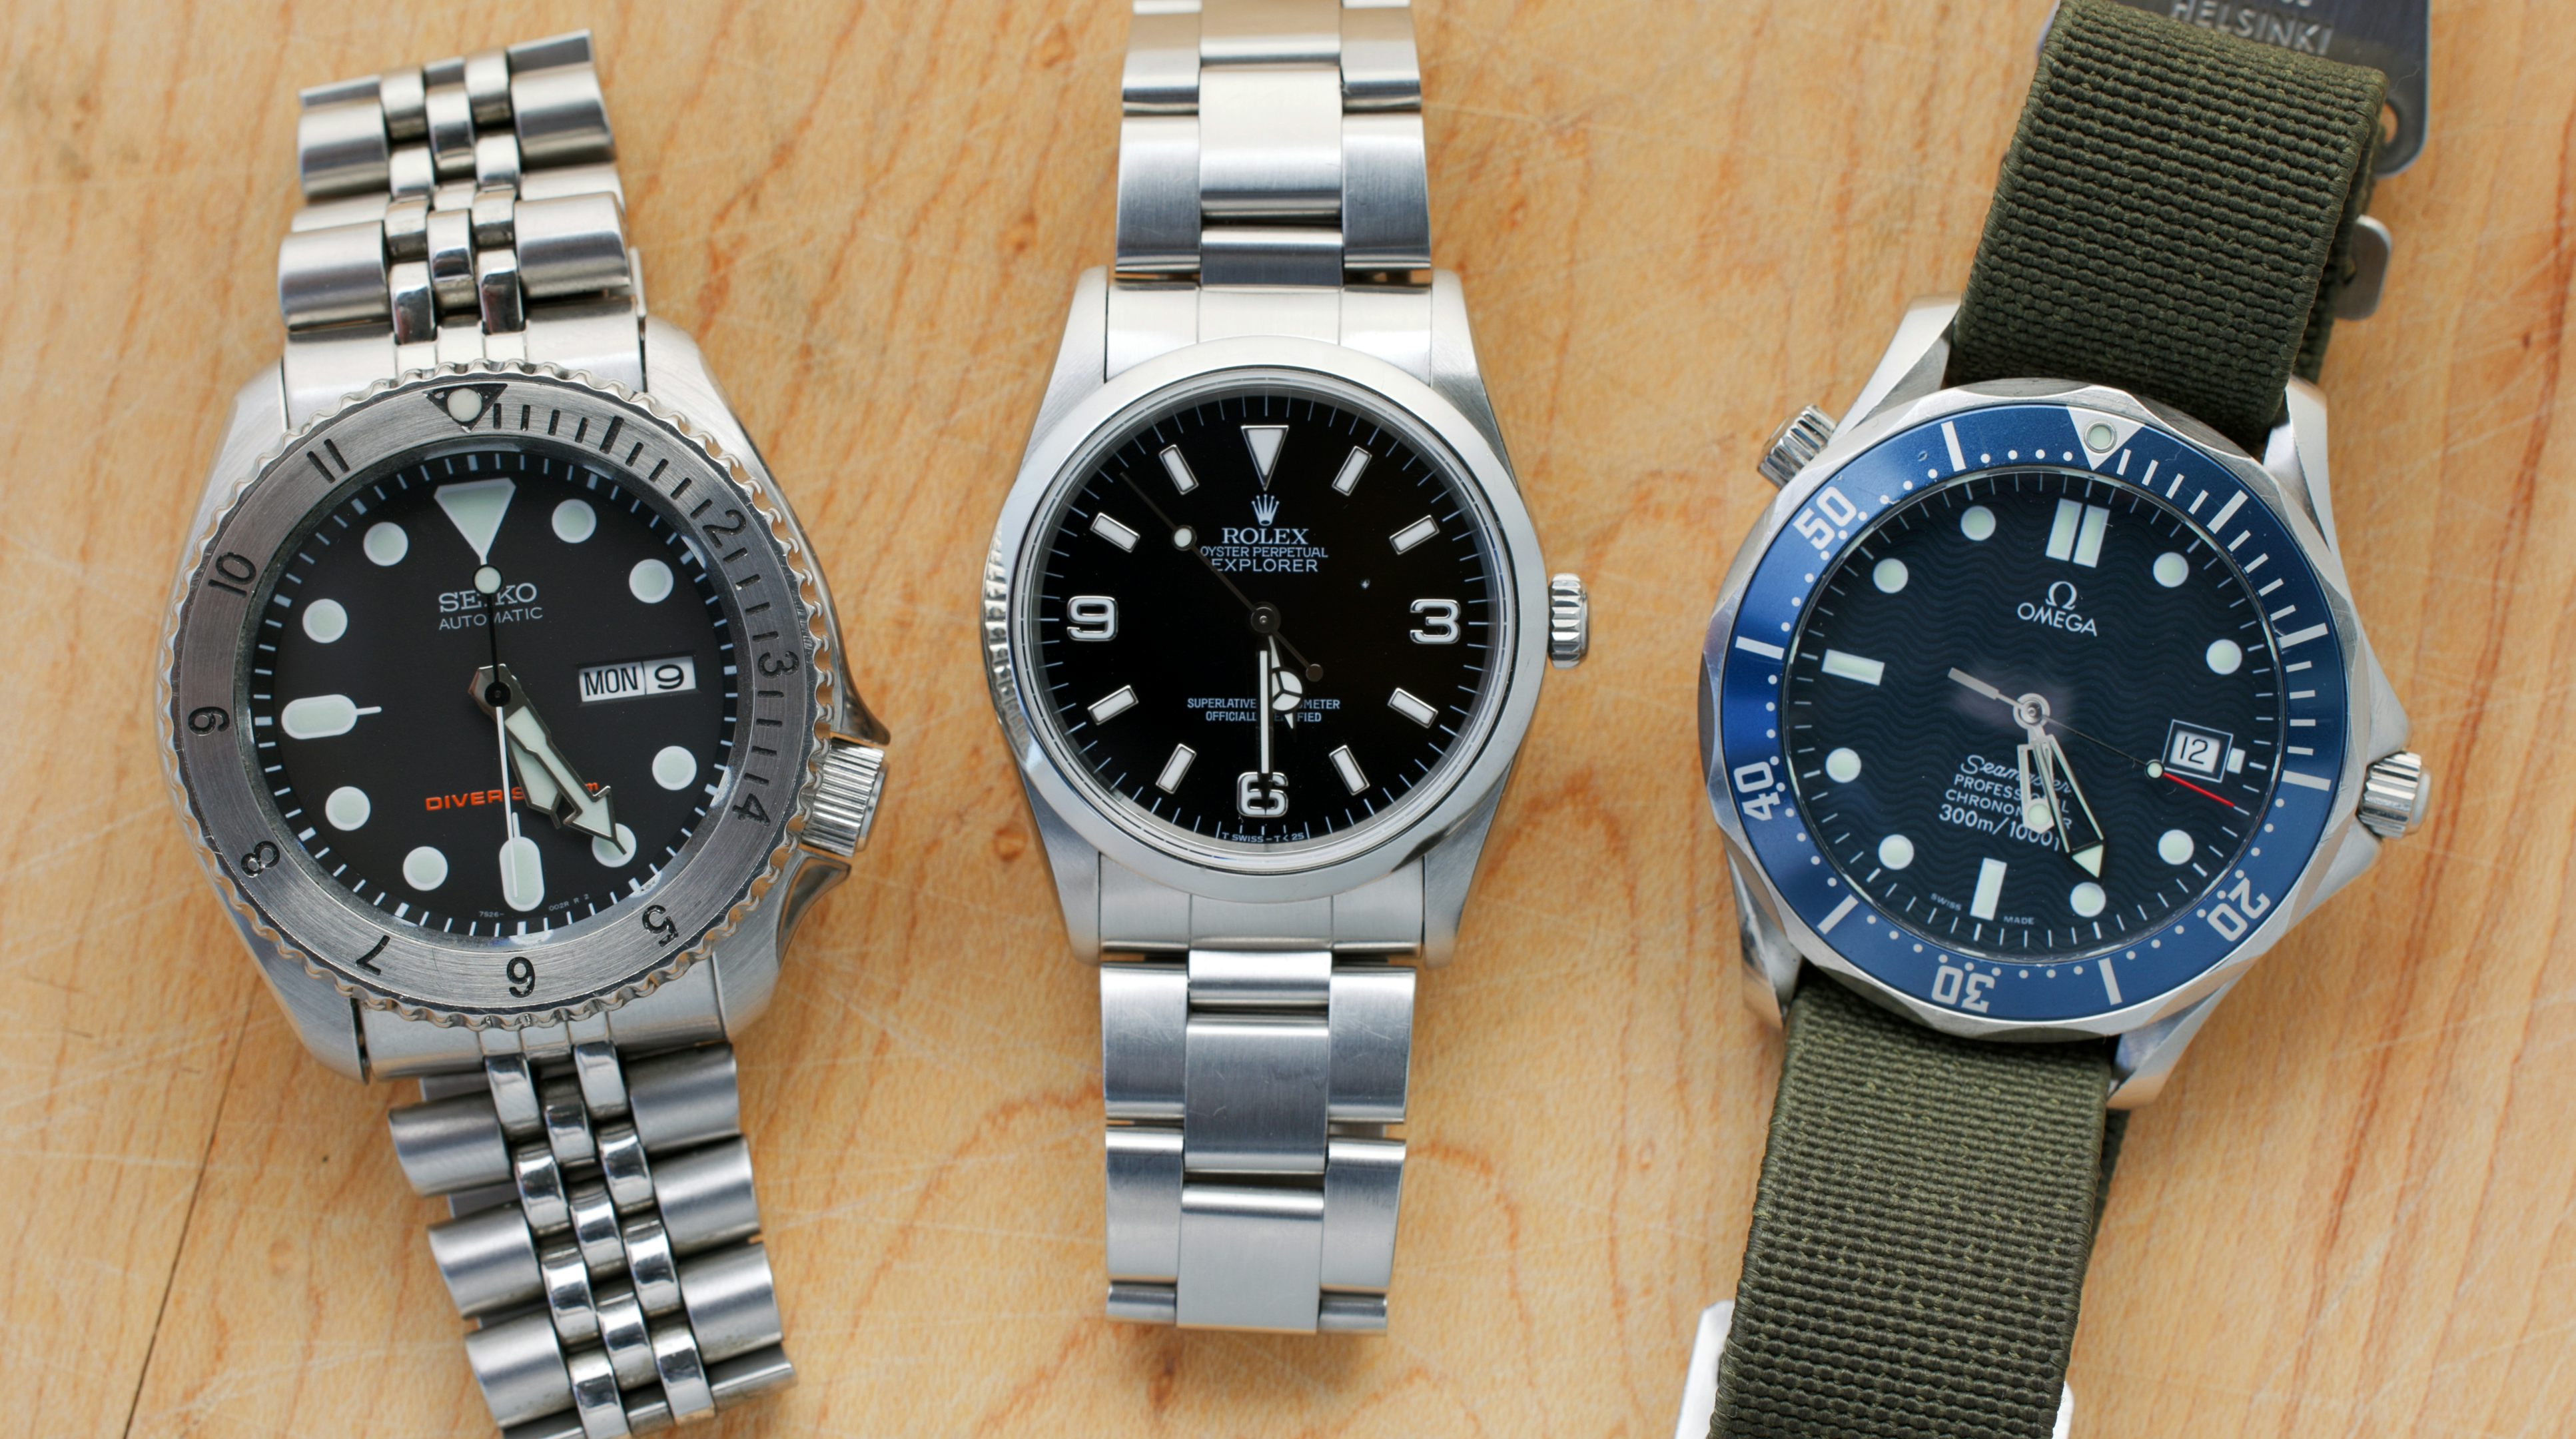 Seiko, Rolex and Omega watches